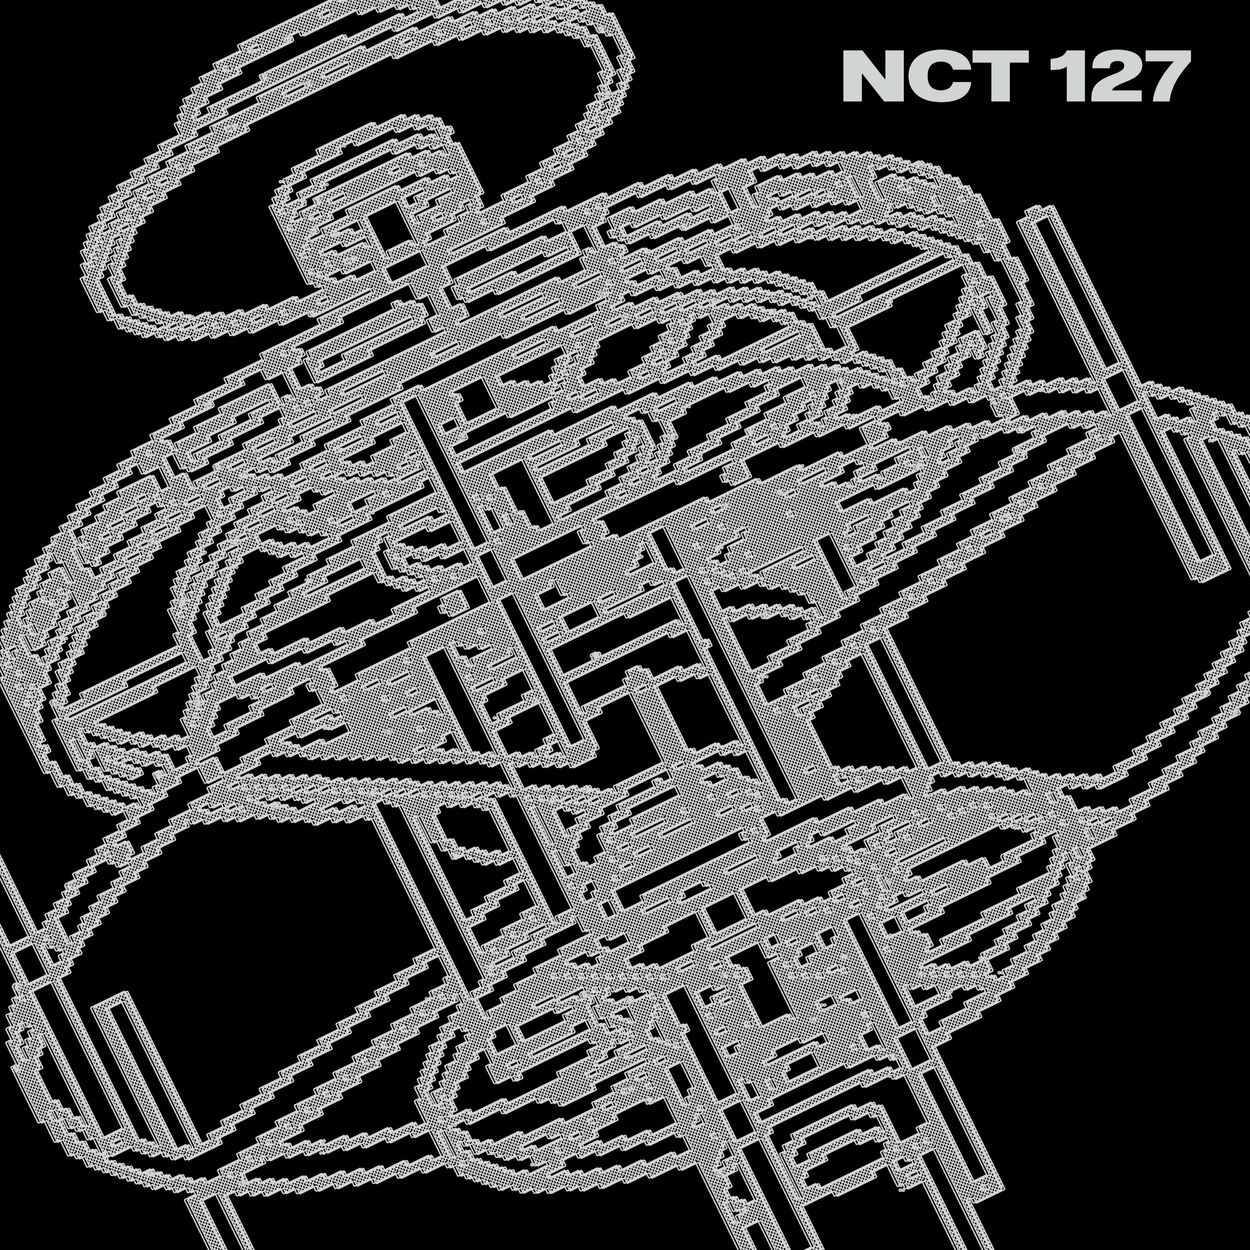 NCT 127 – Fact Check – The 5th Album